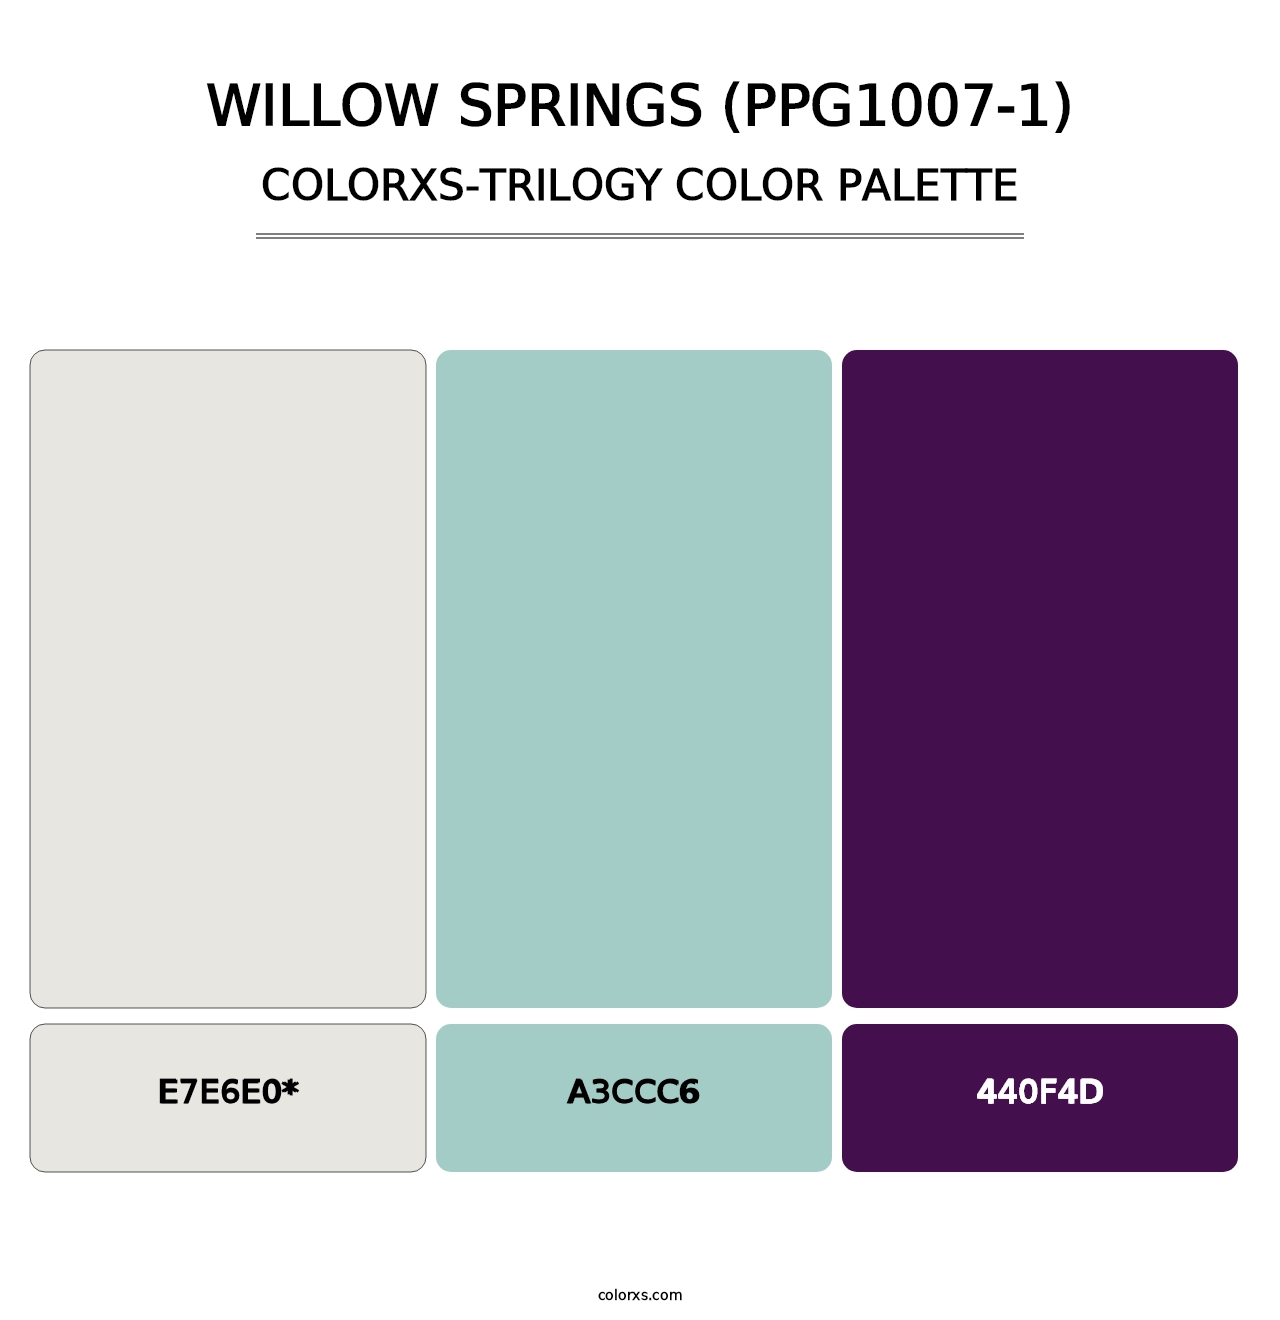 Willow Springs (PPG1007-1) - Colorxs Trilogy Palette